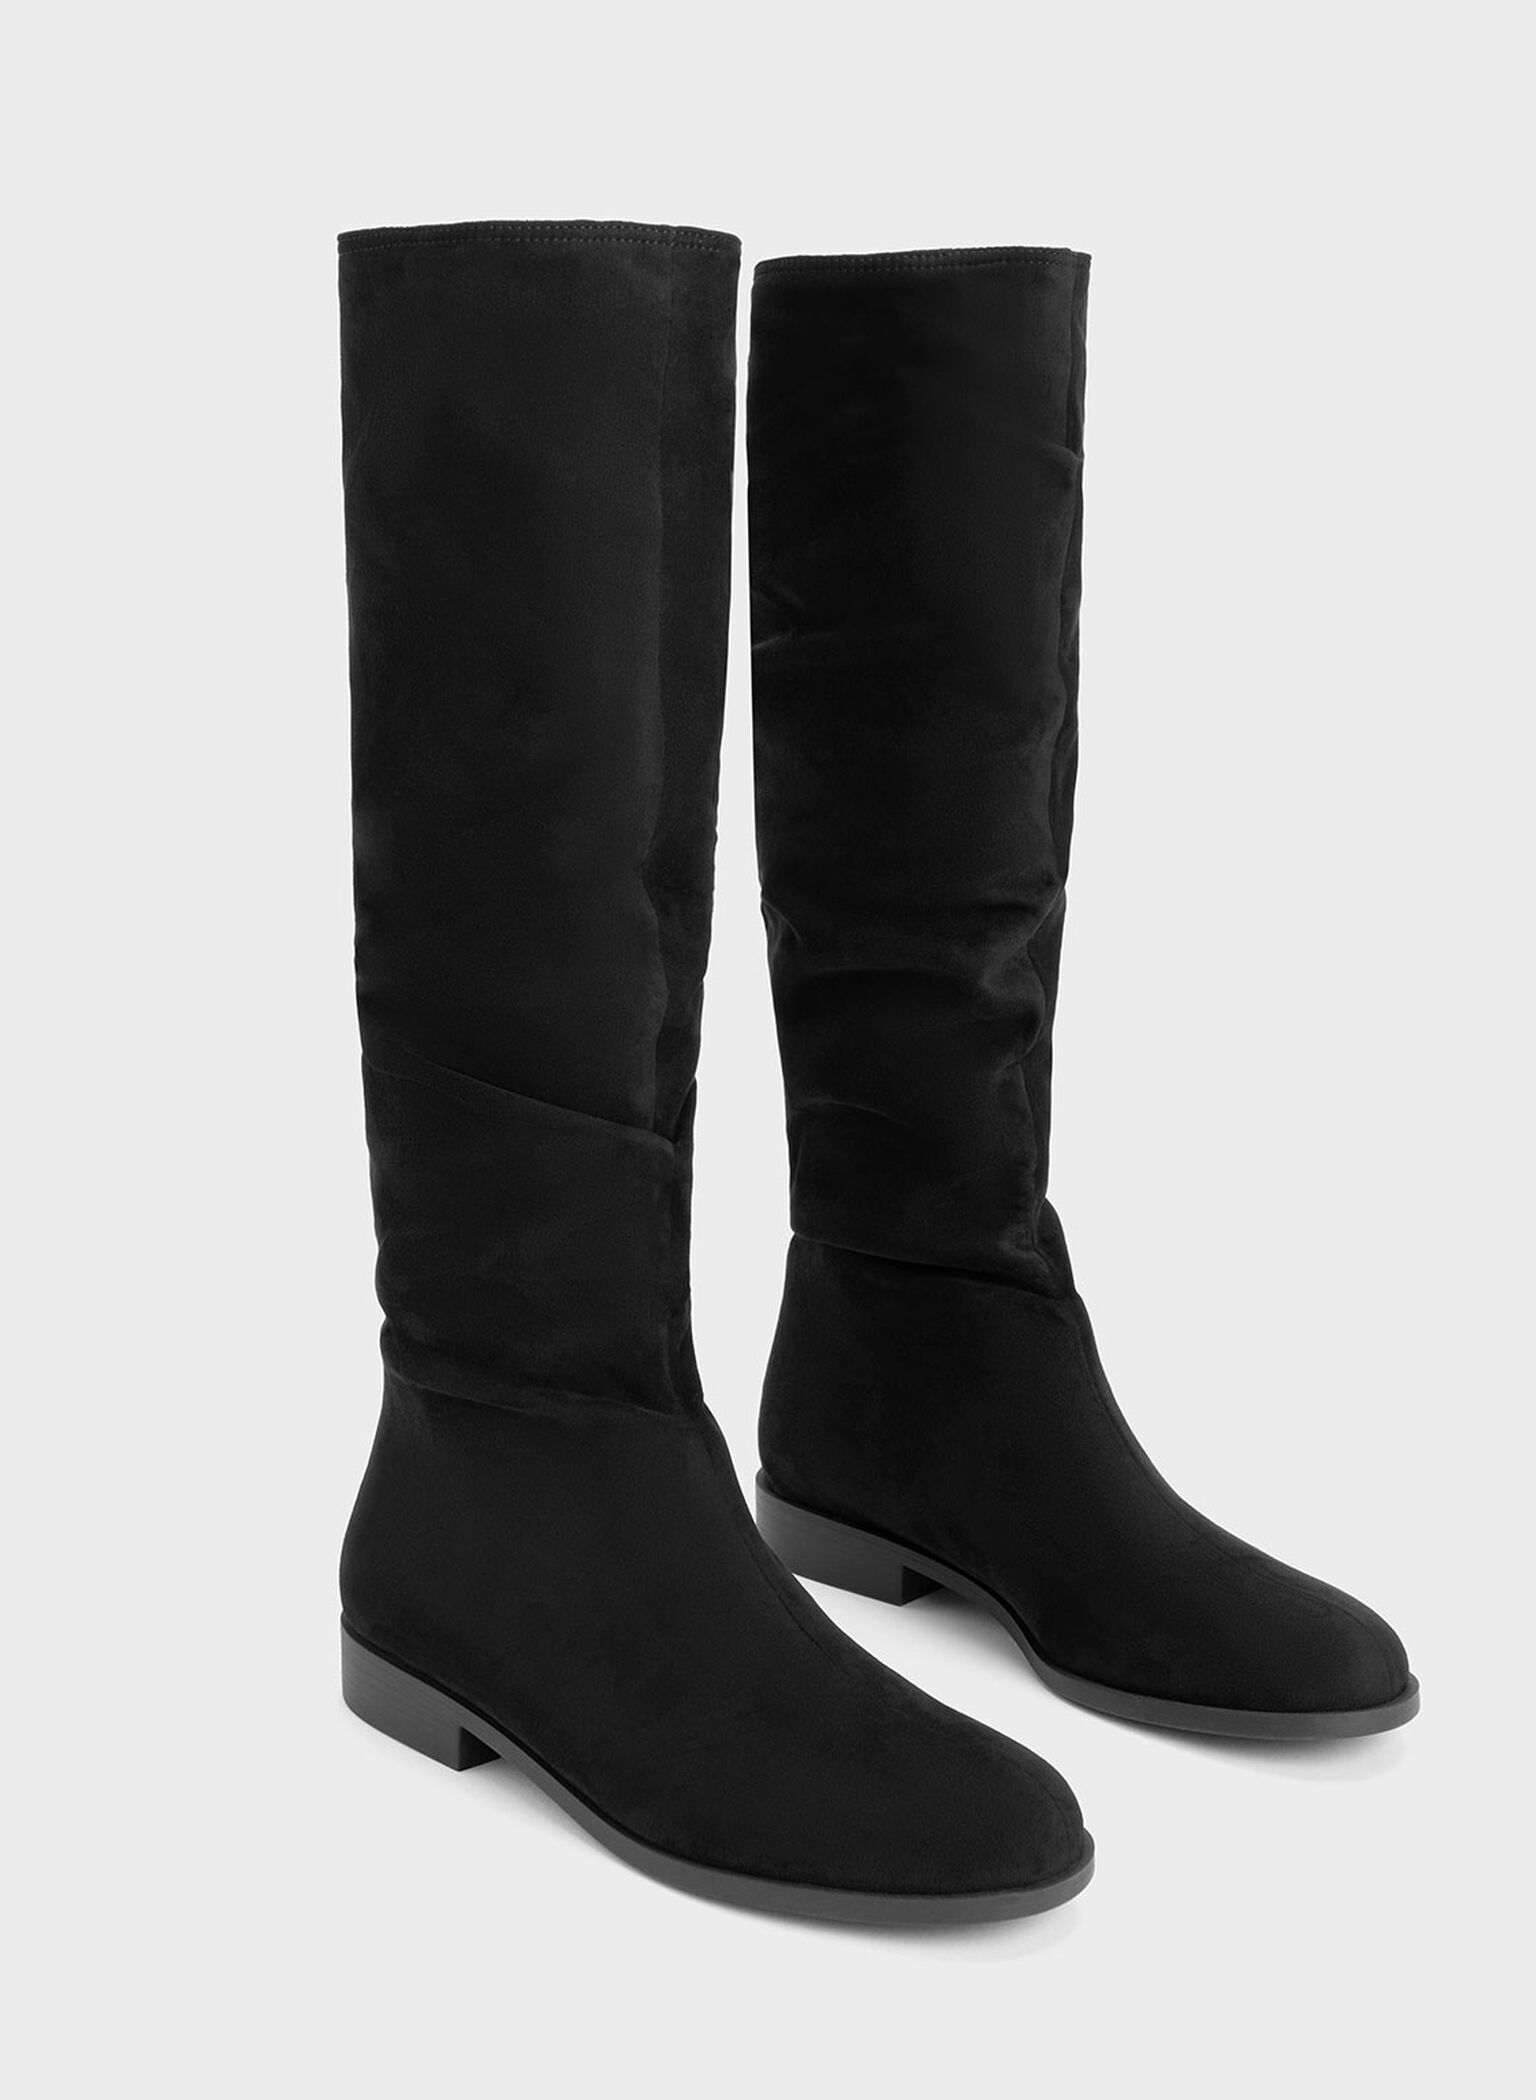 Textured Ruched Knee-High Boots, Black Textured, hi-res